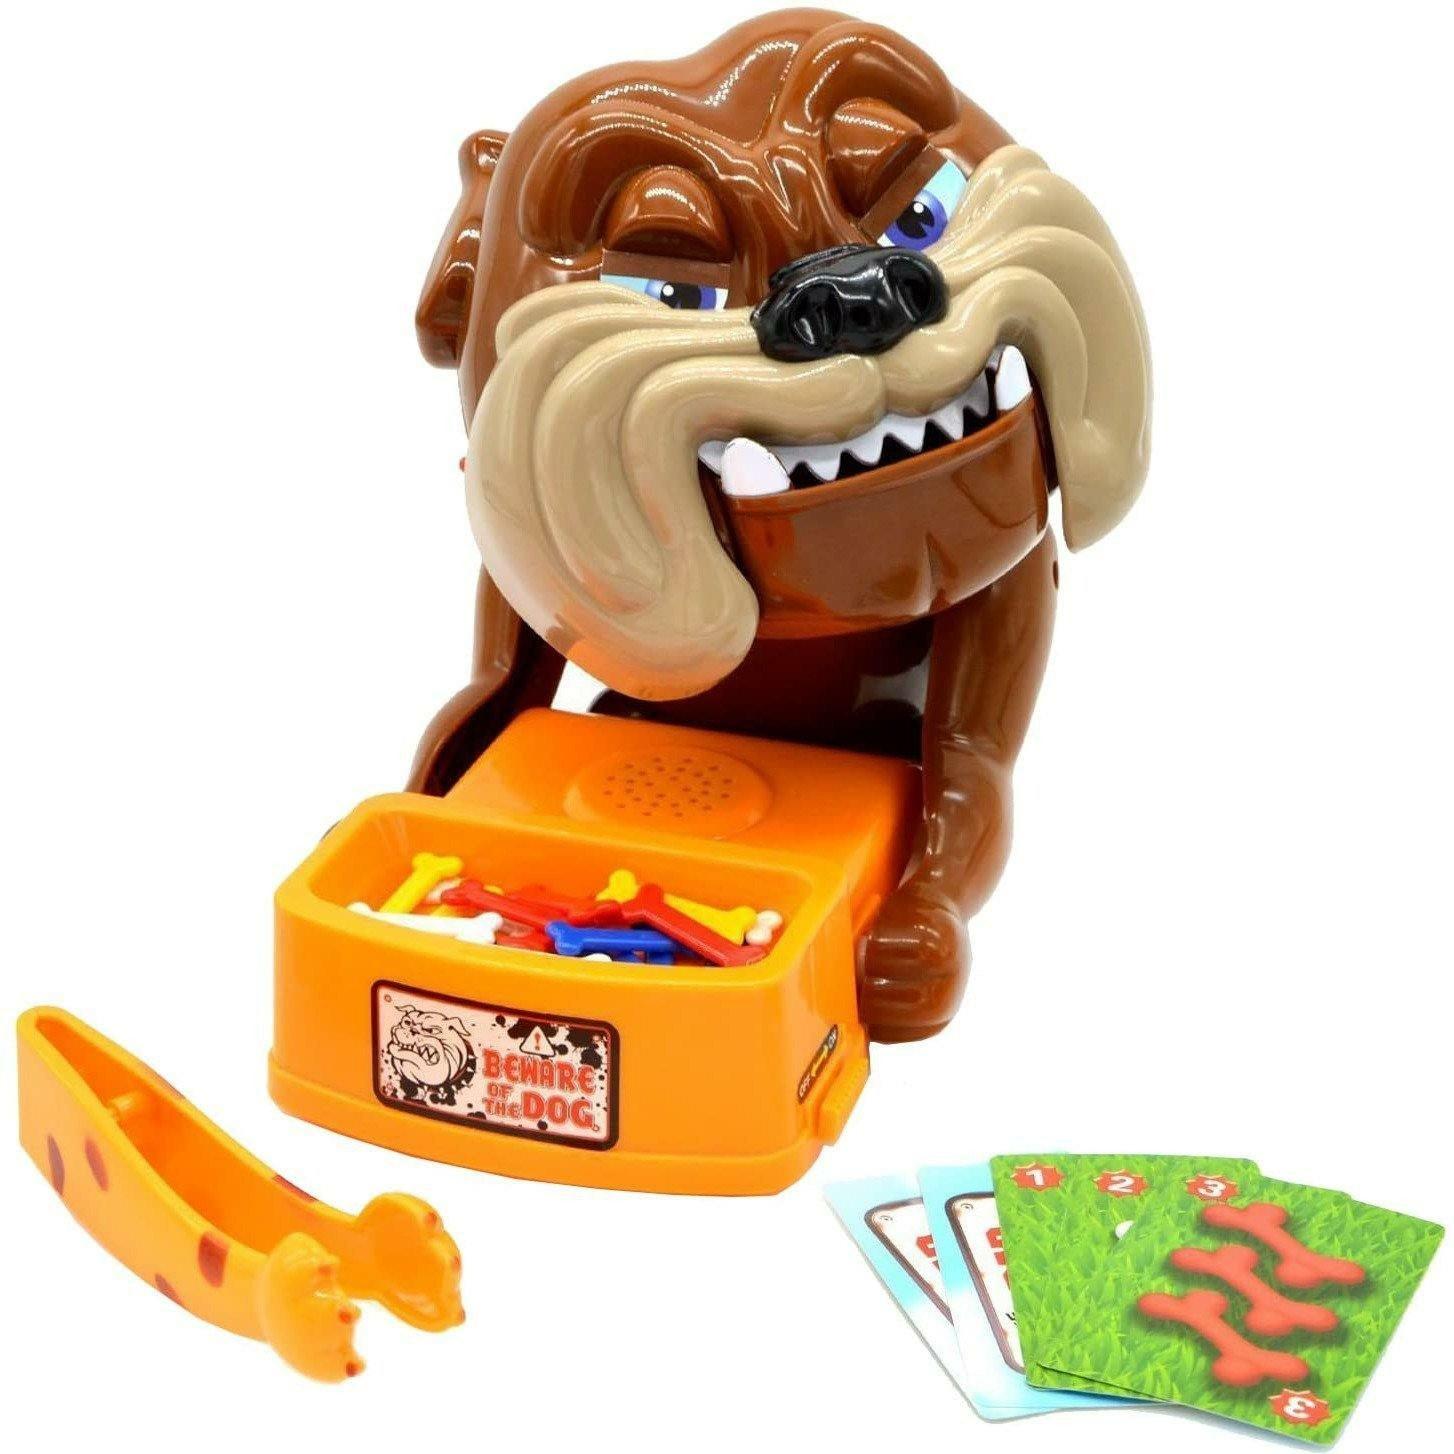 Bad Dog Trick Game For Kids - BumbleToys - 5-7 Years, Animals, Boys, Toy Land